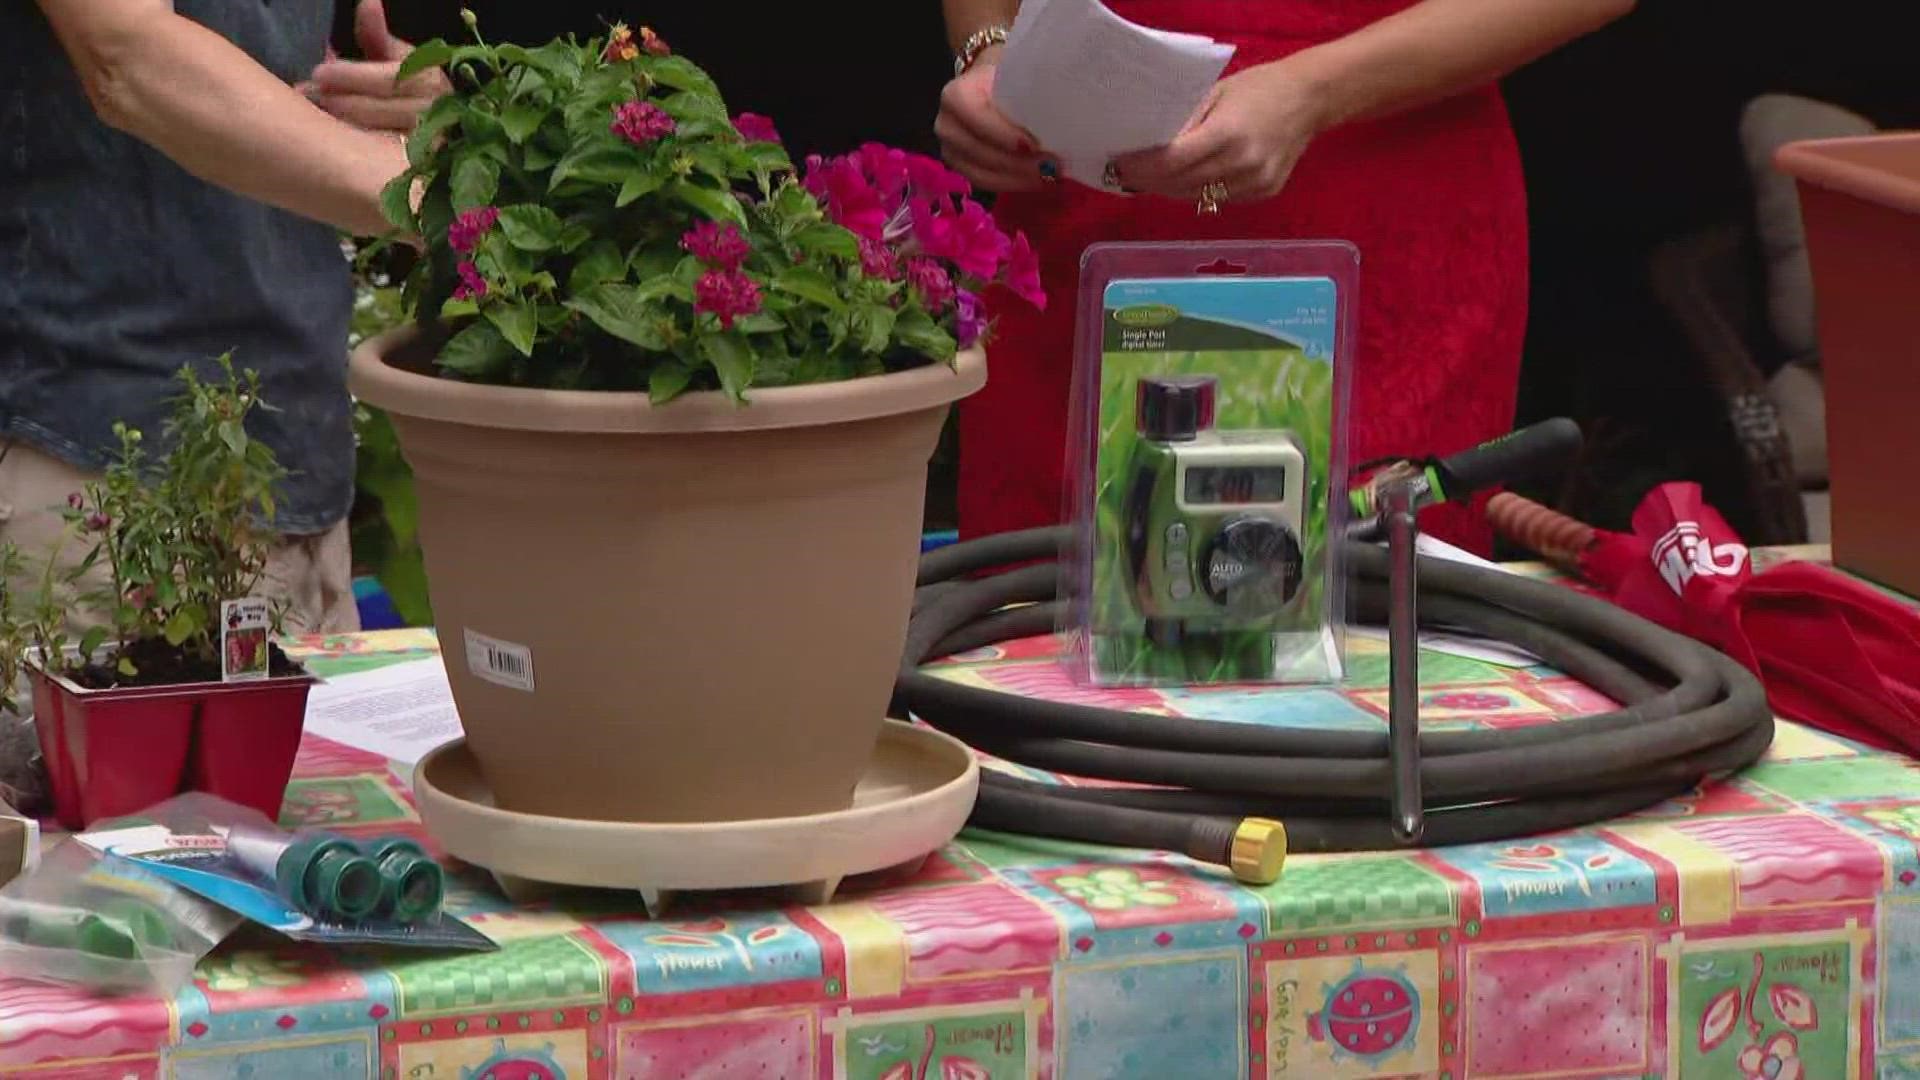 Debi Borden-Miller is with the Associated Landscape Contractors of Colorado. She's here to talk about how to protect your plants and save water.